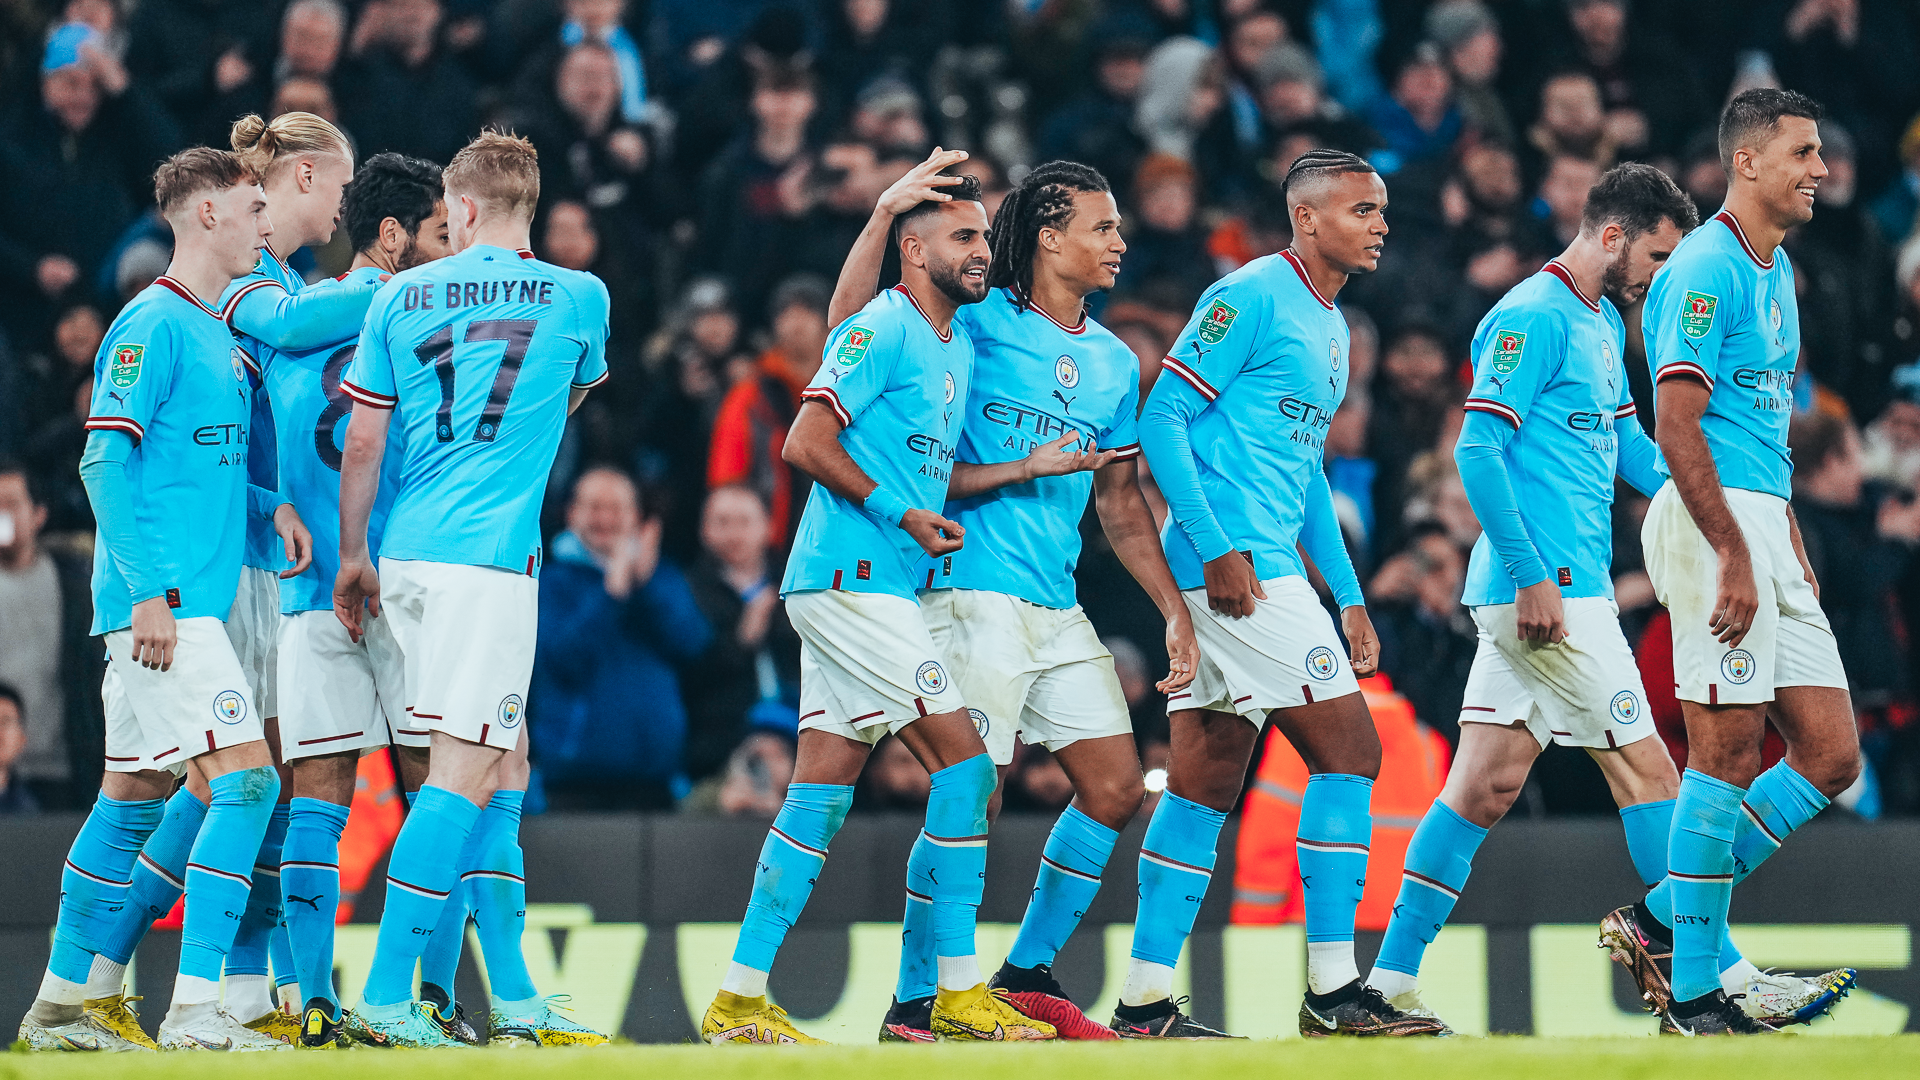 City prevail in end to end Carabao Cup classic with Liverpool